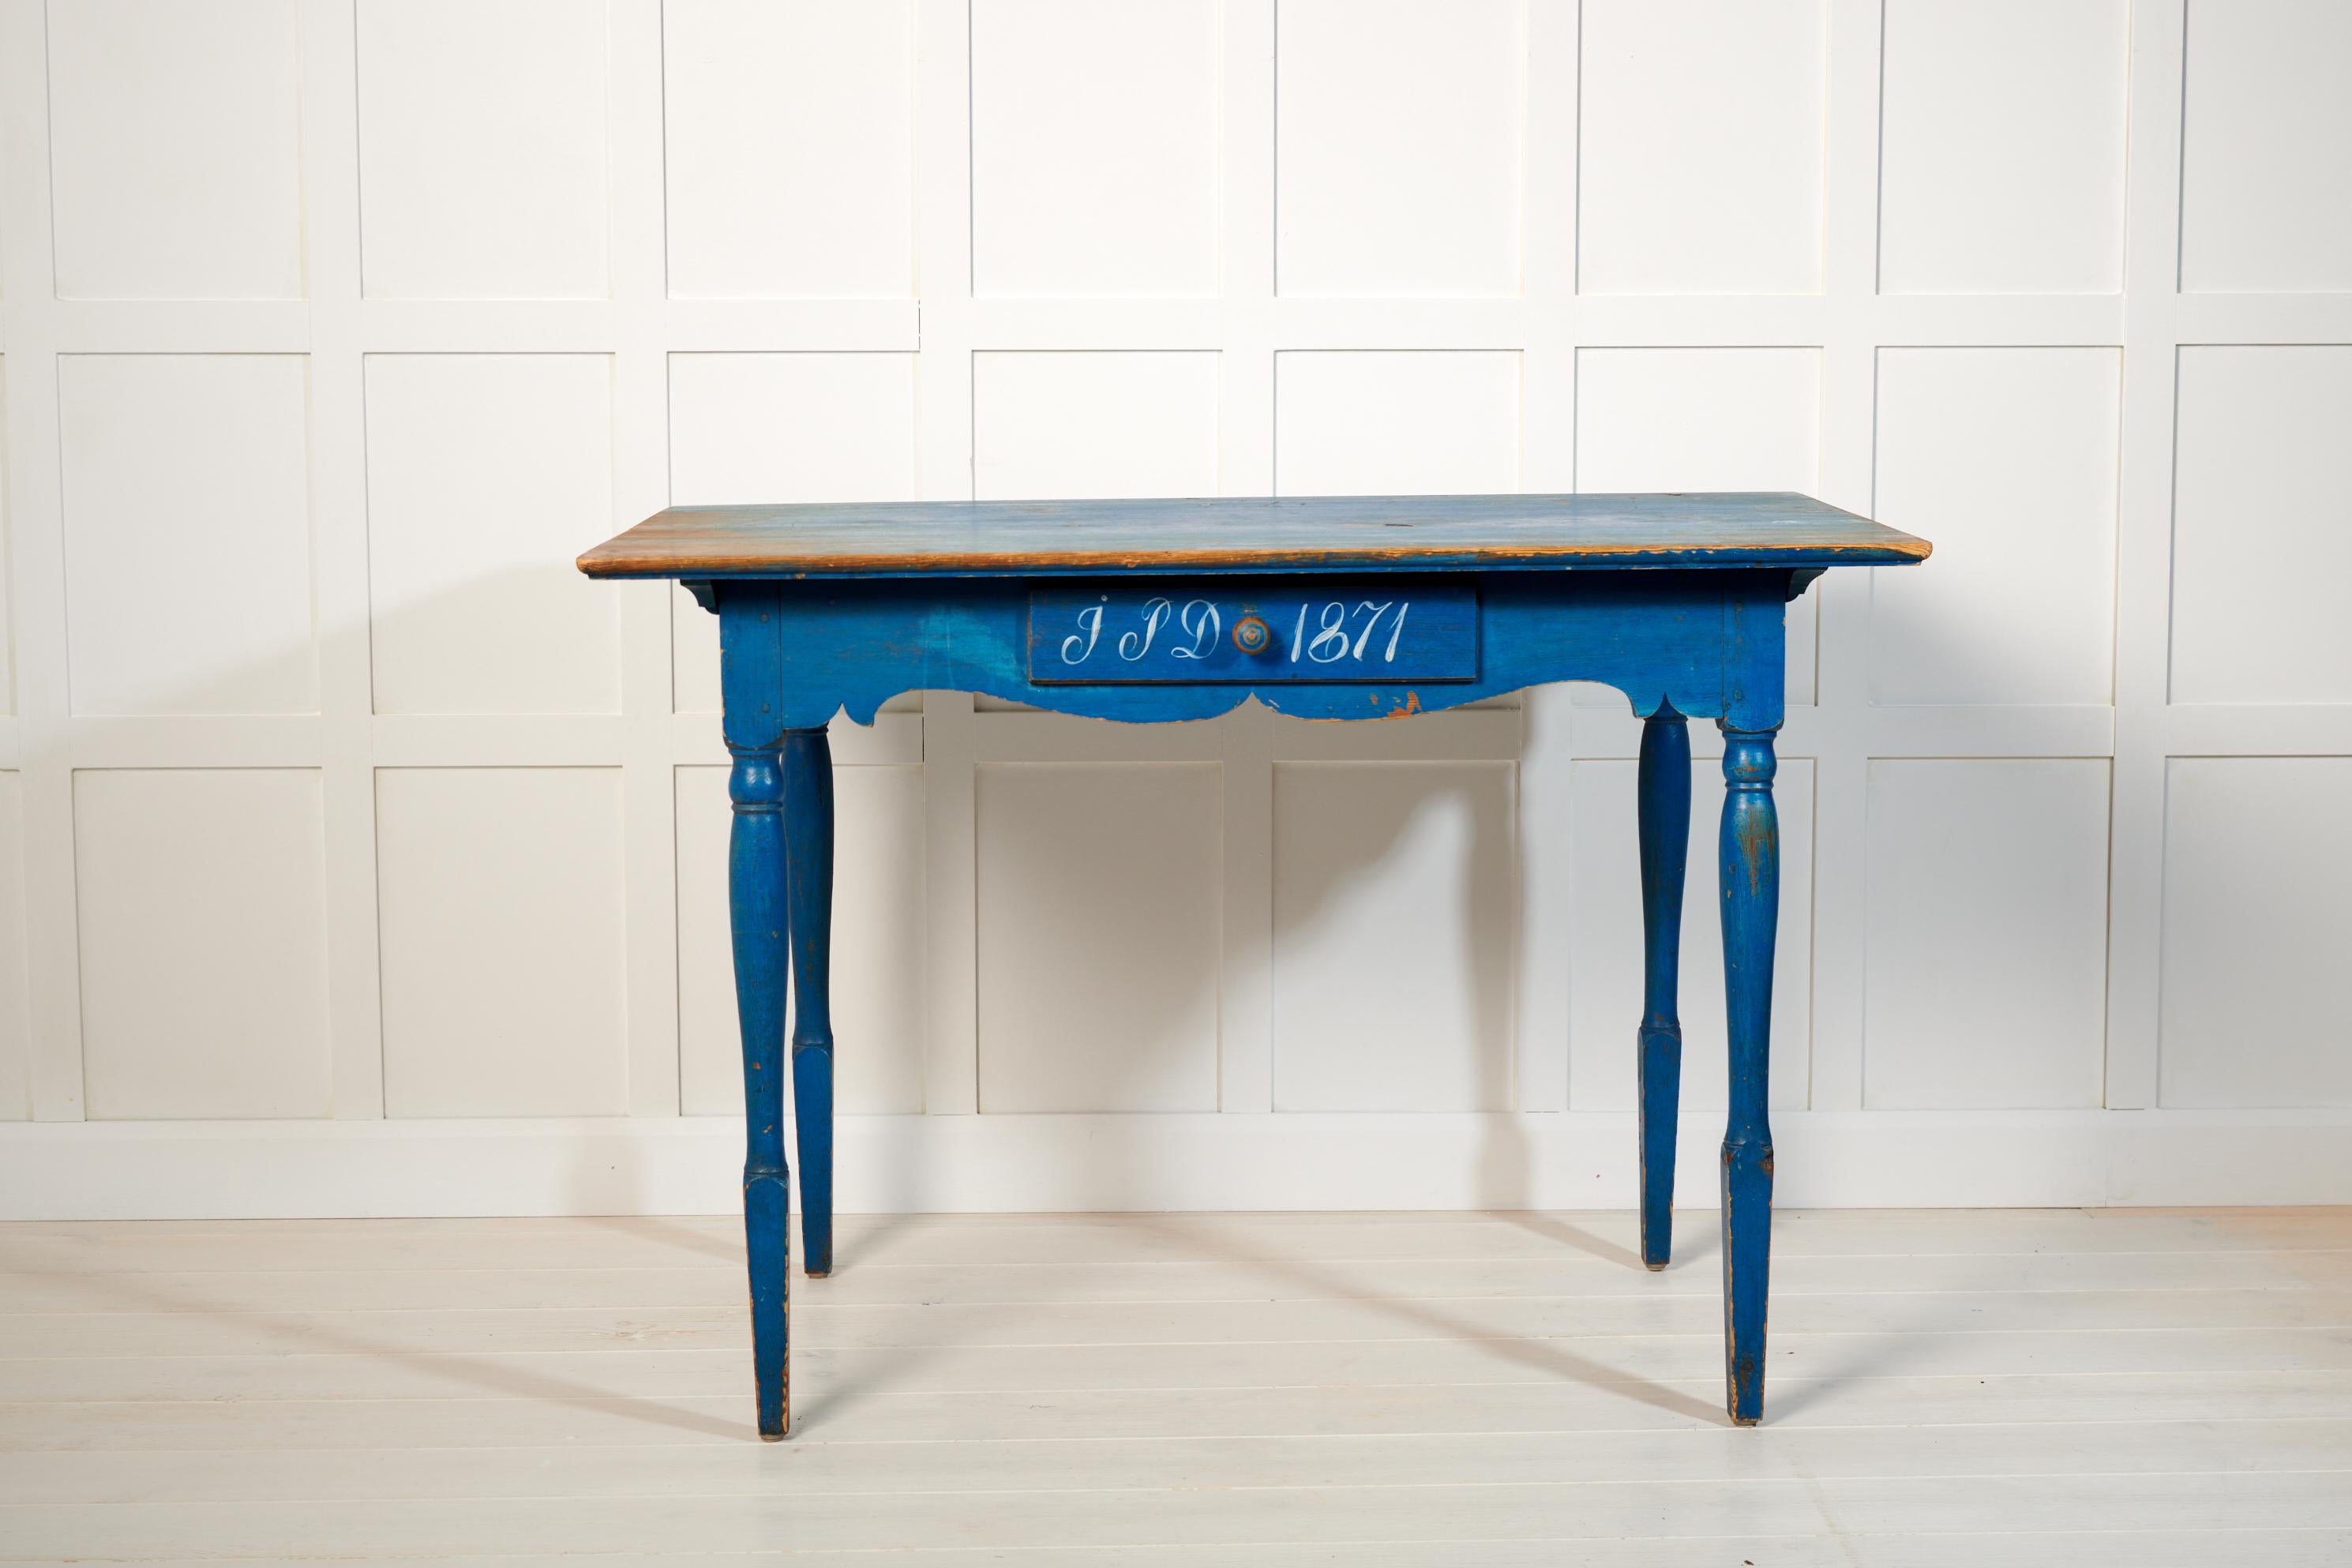 Antique Swedish country table or desk with a drawer. The table is an authentic country house furniture from northern Sweden made by hand in solid pine. The table has the original blue paint with painted initials and the year 1871 on the drawer. The